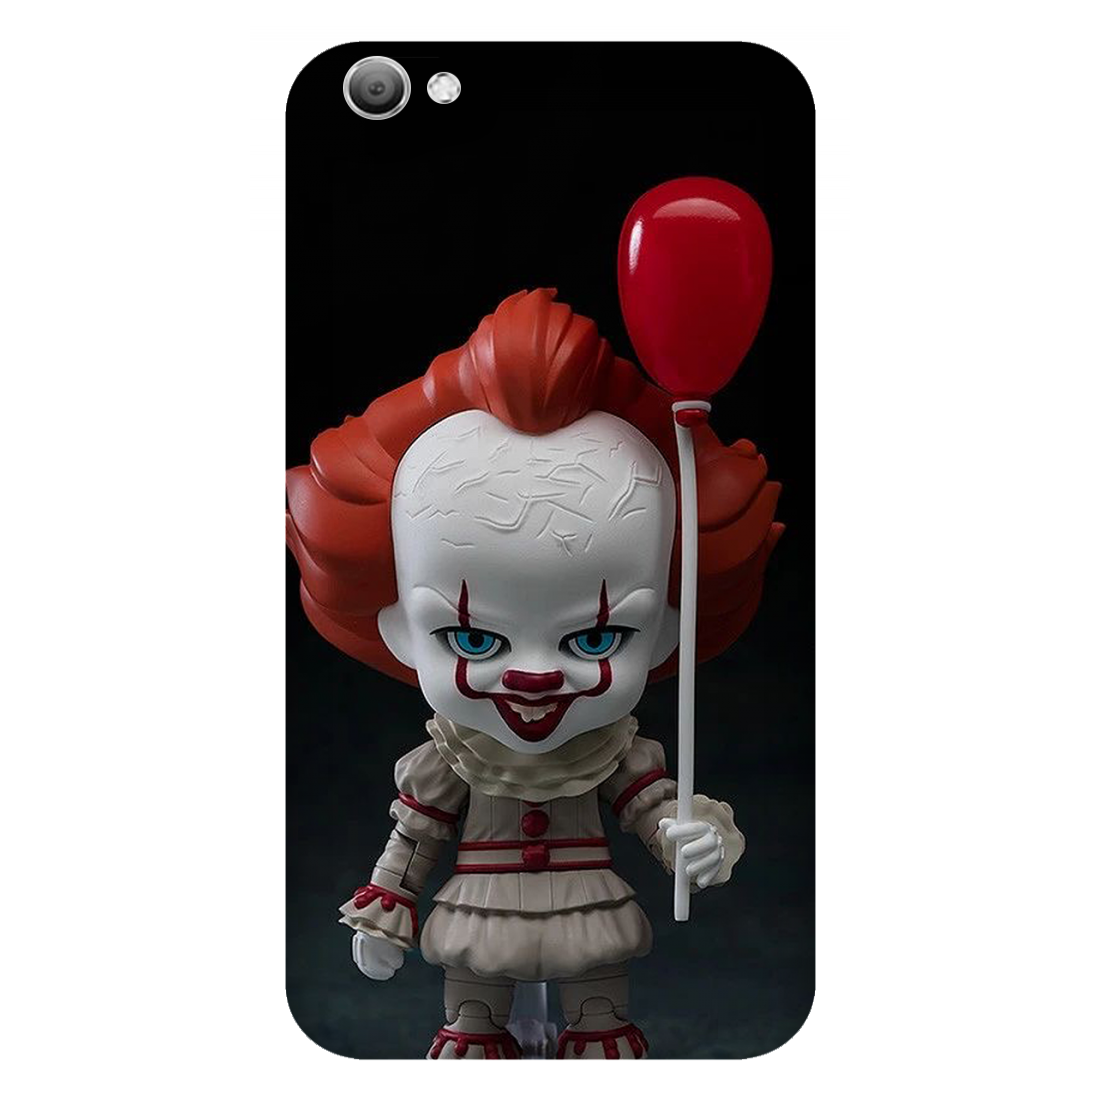 Pennywise Toy Figure Case Vivo V5